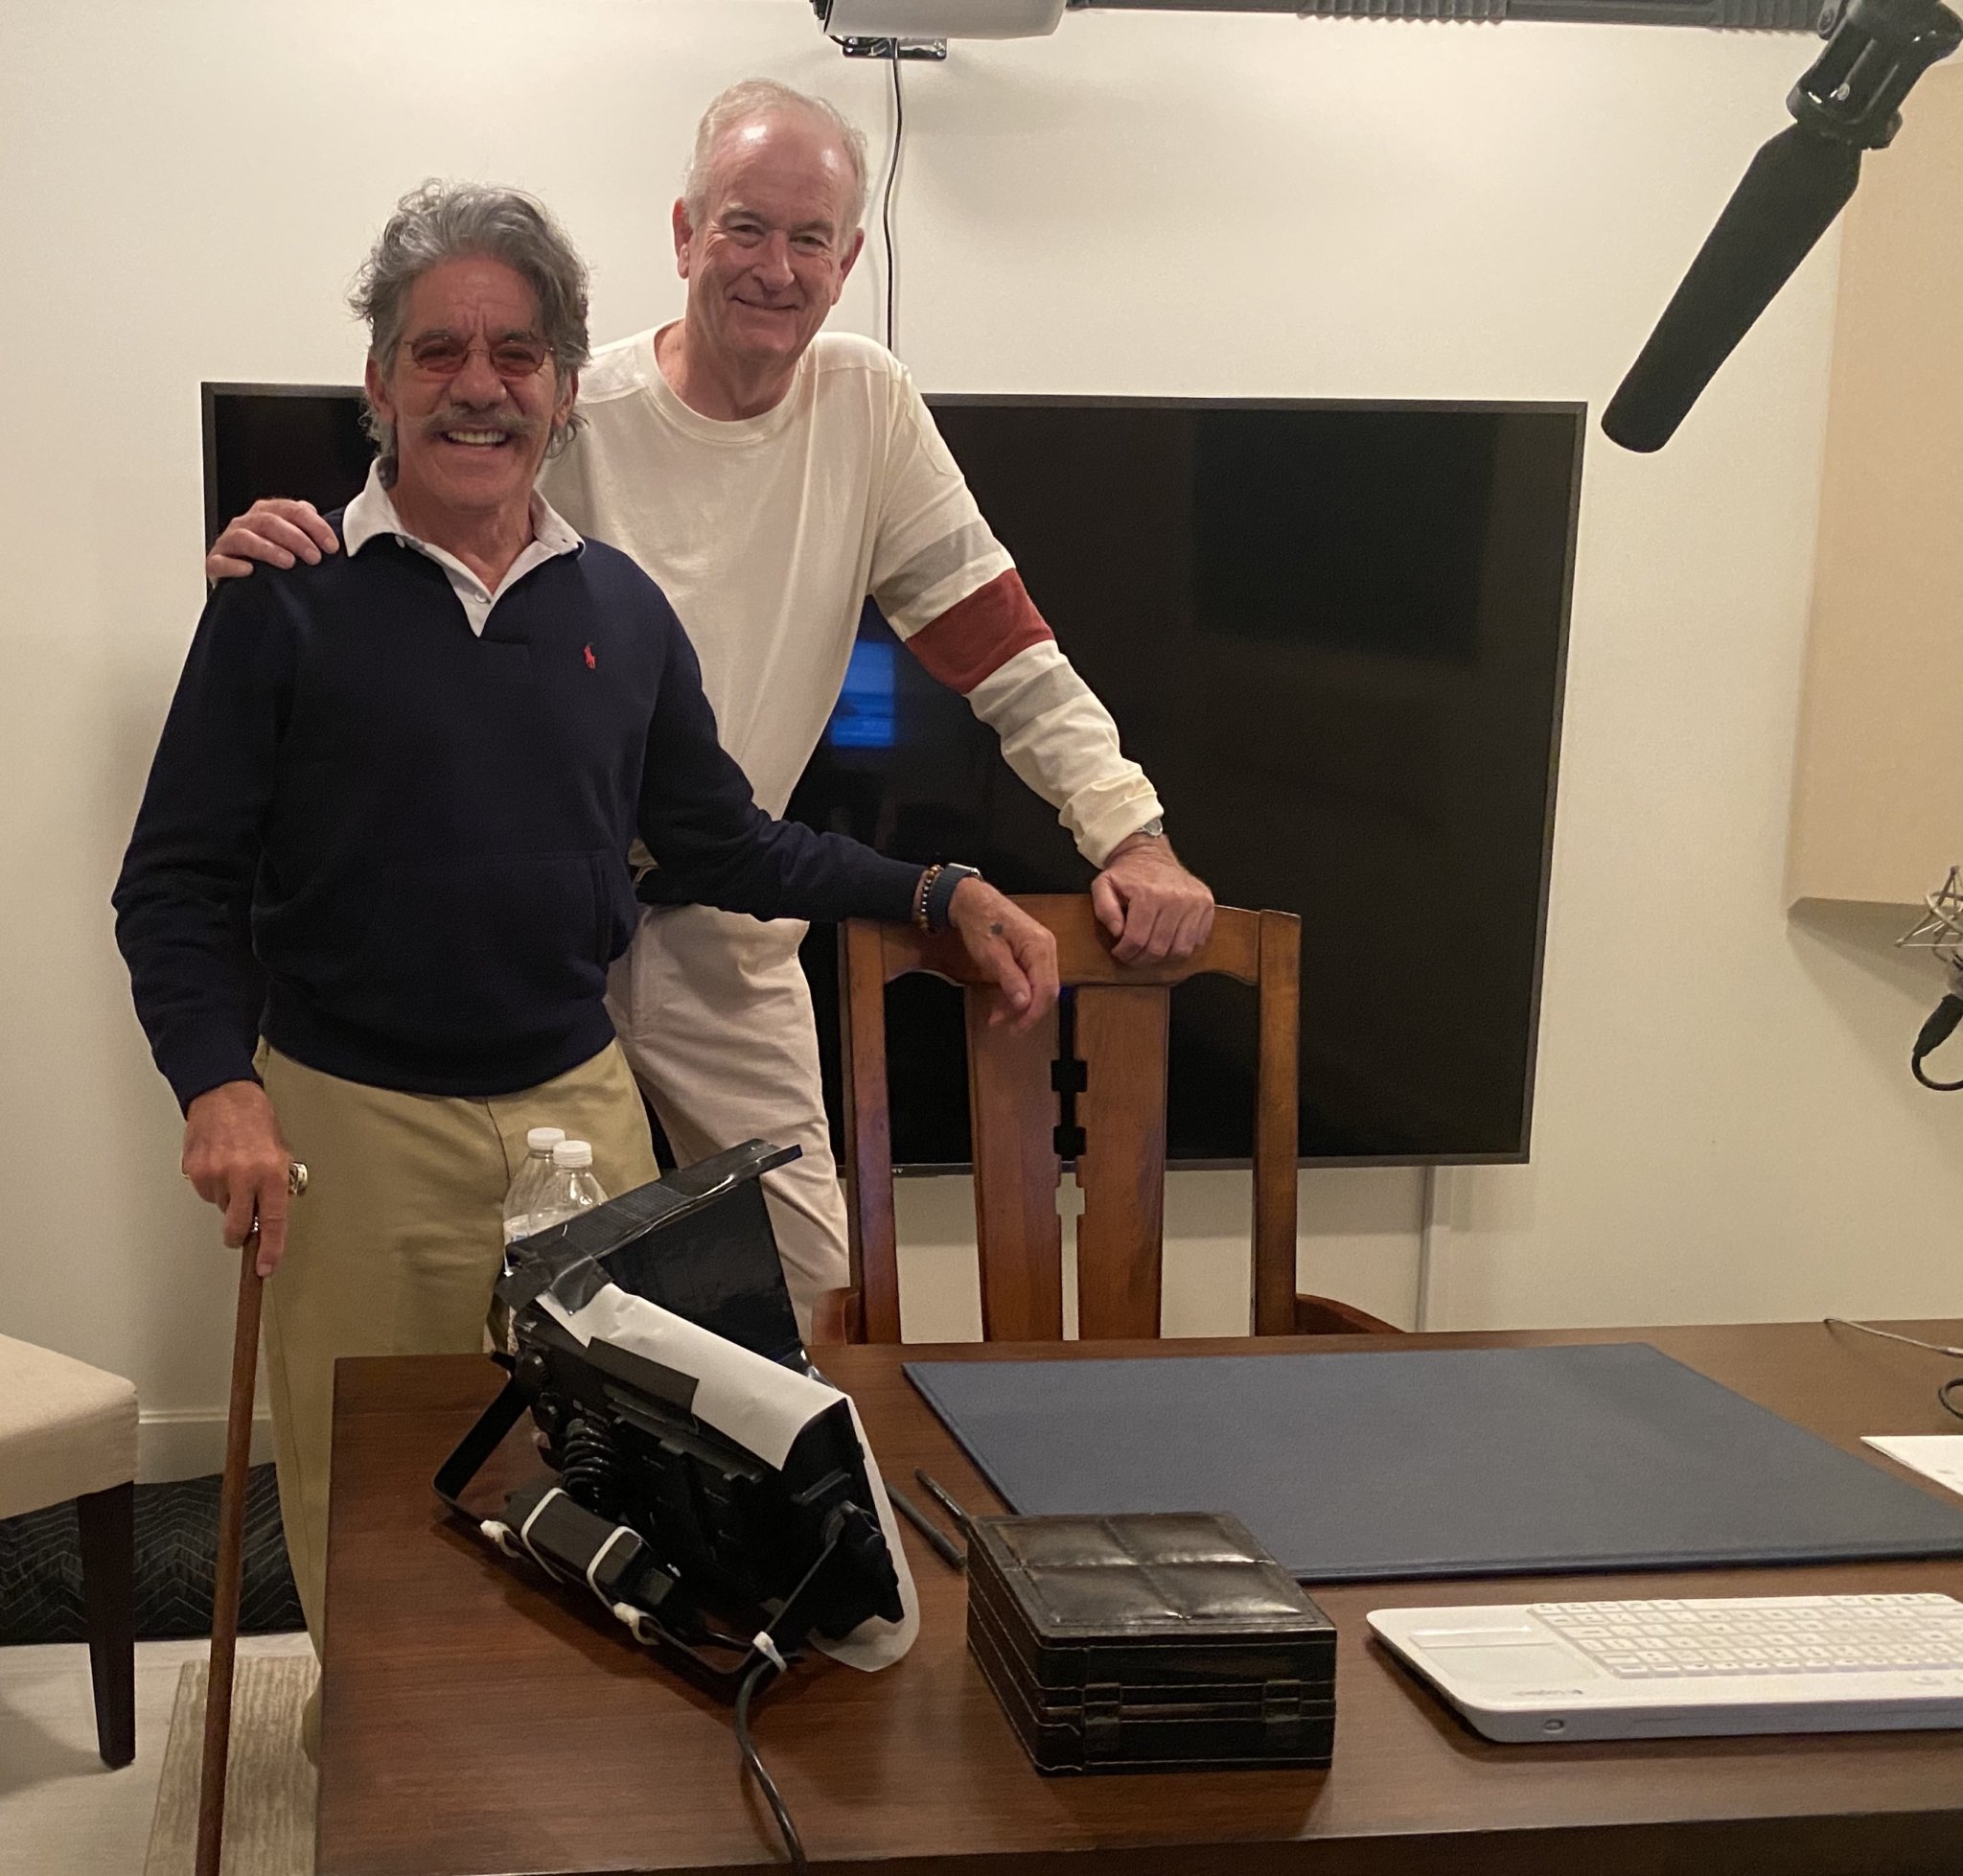 A look at Bill O'Reilly’s broadcasting room in his Montauk home with Geraldo Rivera